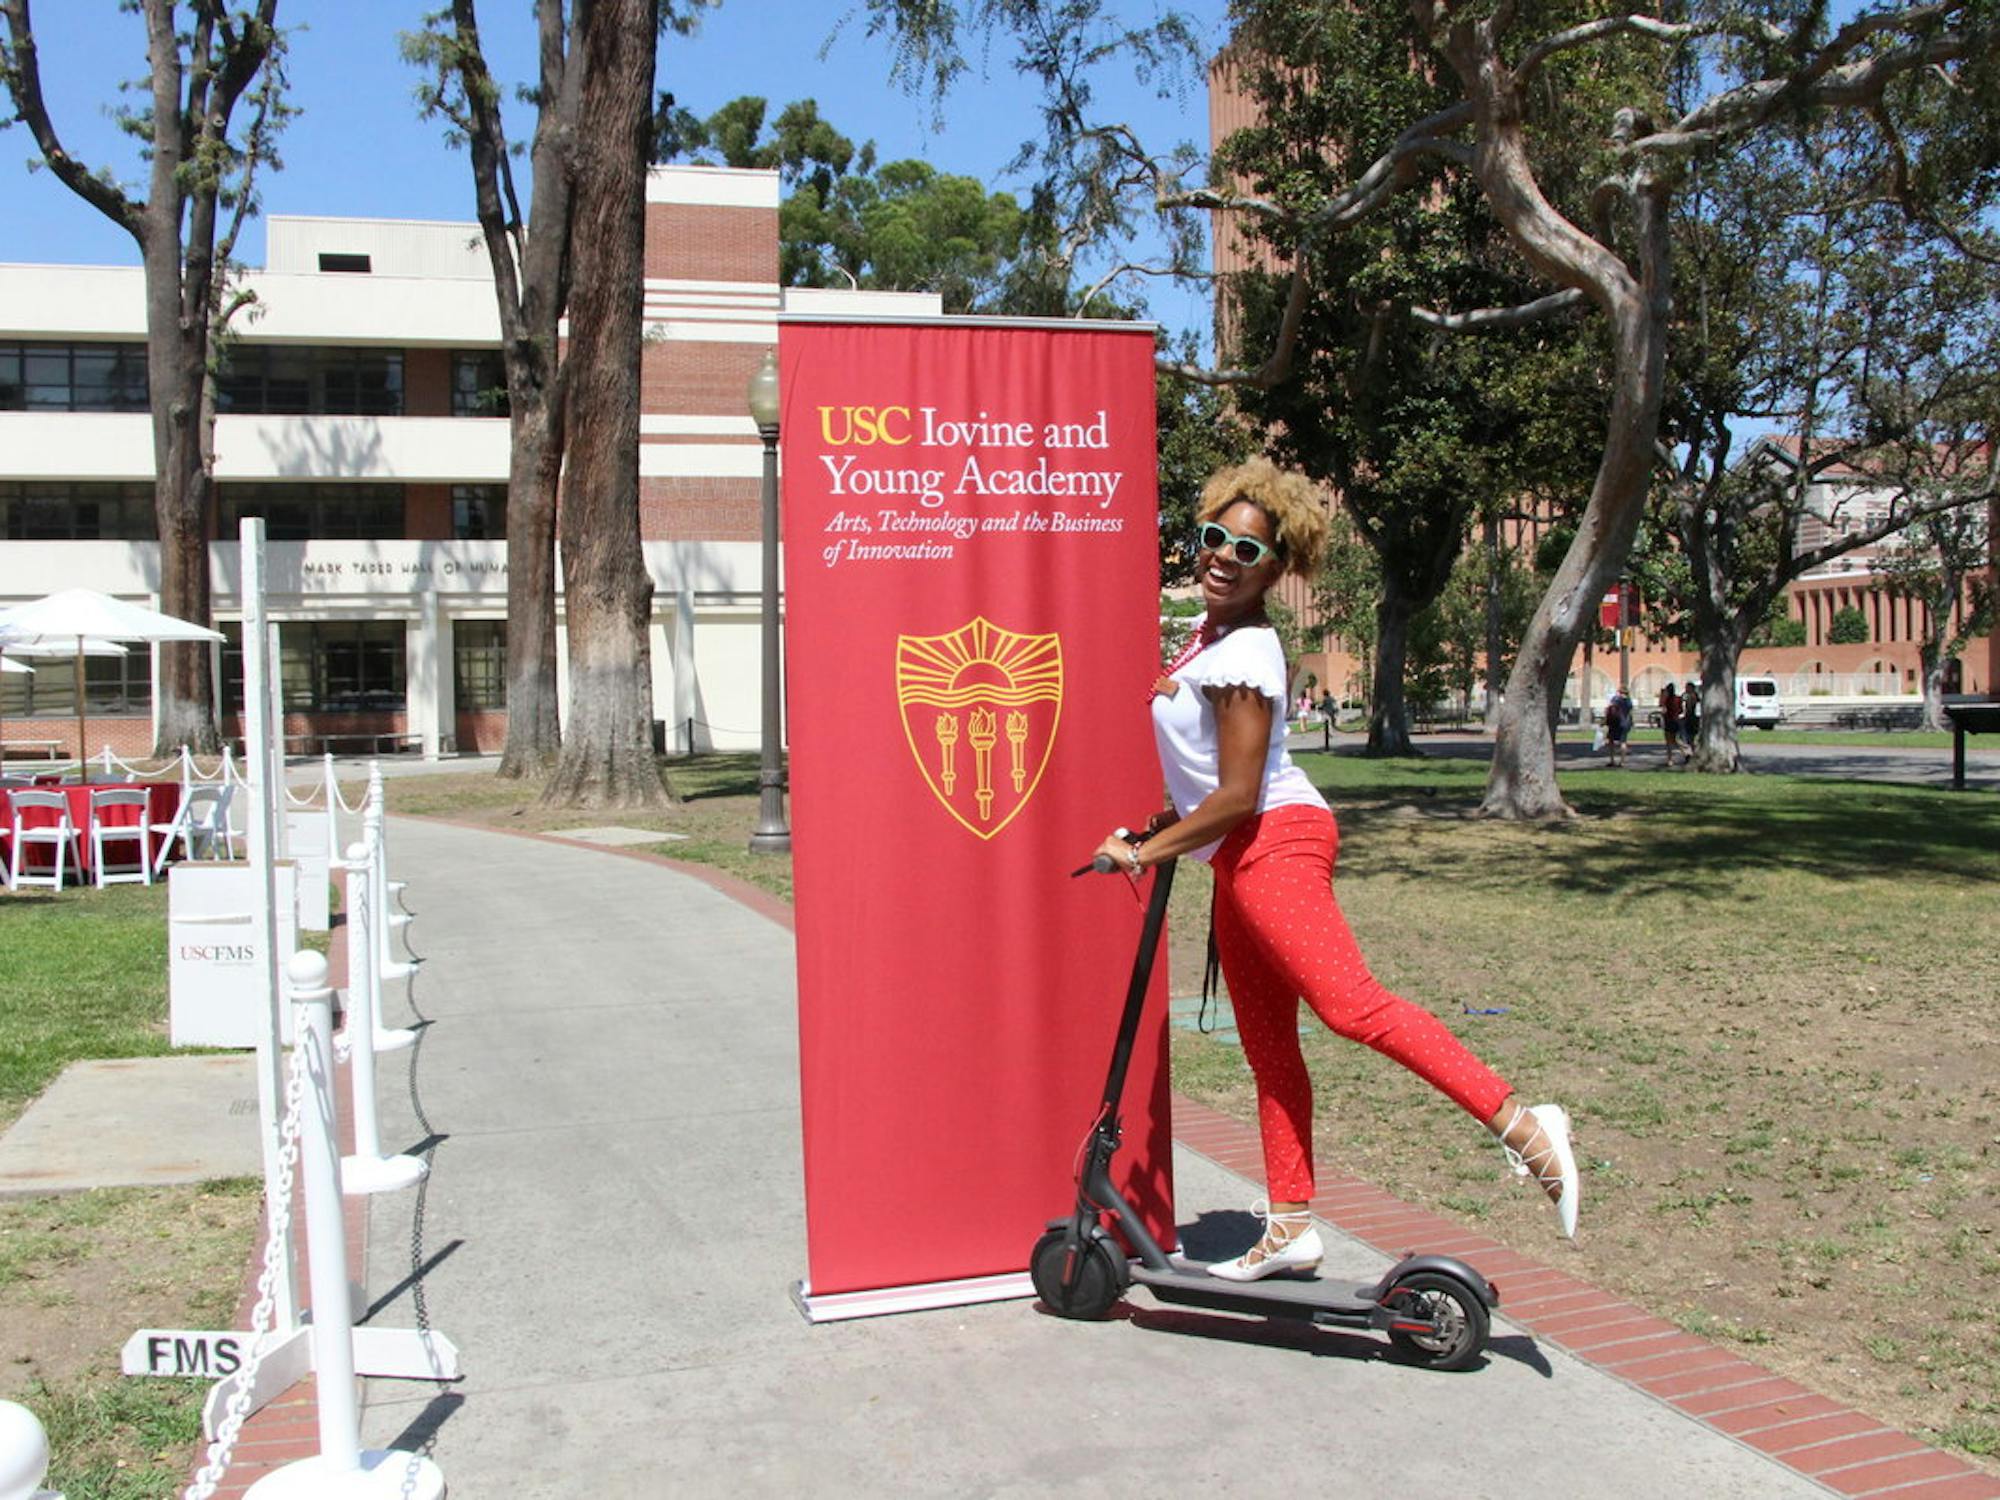 A woman poses atop a scooter near a banner that reads USC Iovine and Young Academy